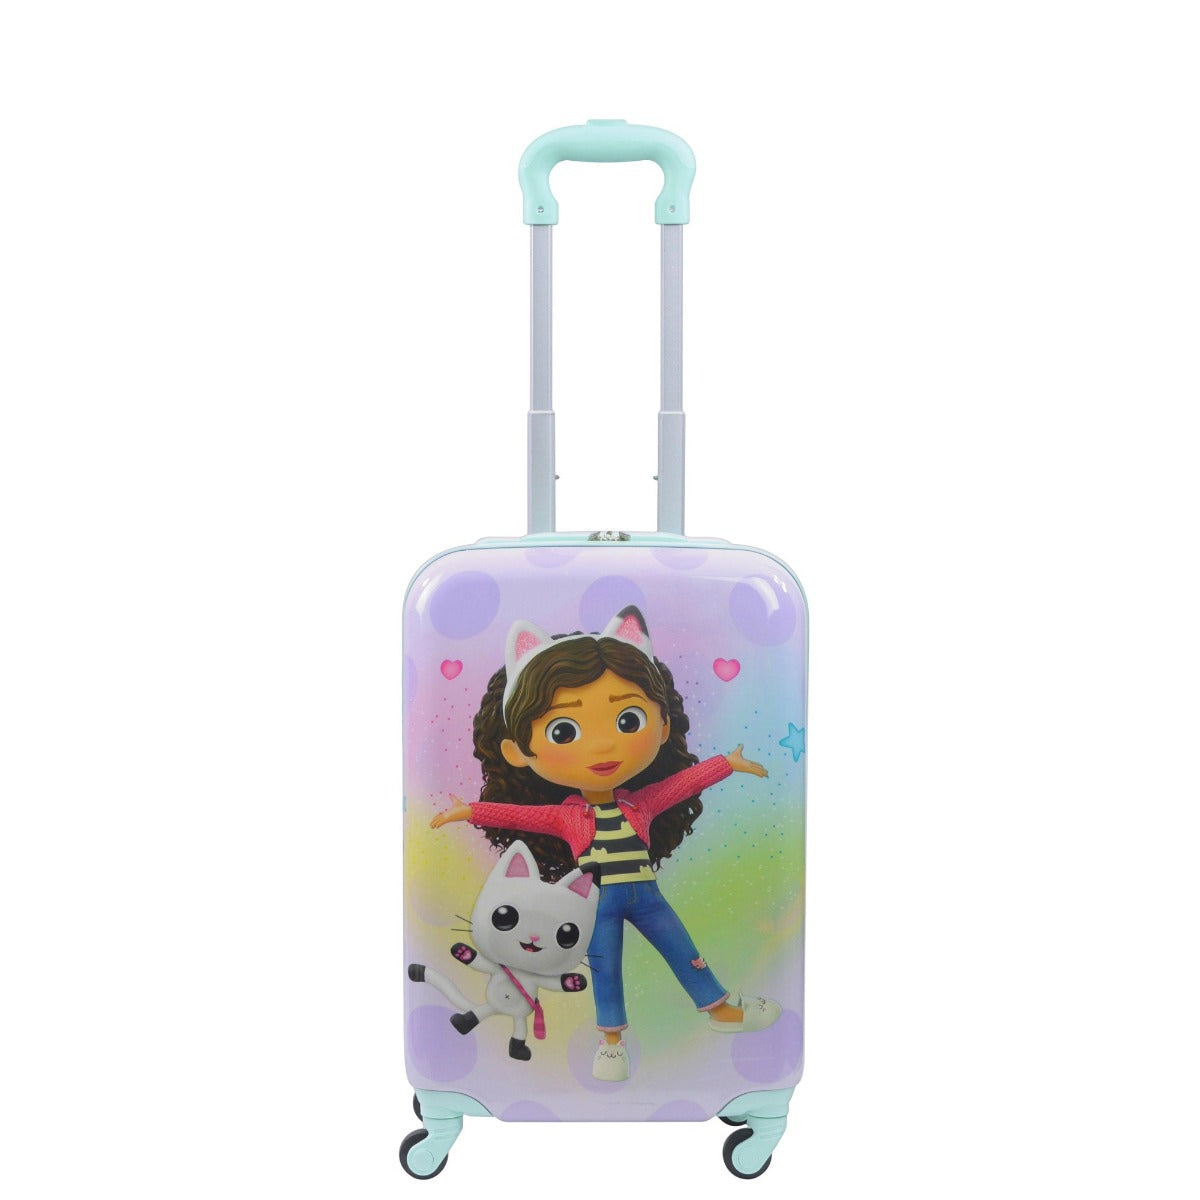 Gabby's Dollhouse 21 inch hardside spinner suitcase - best kids carry on luggage for traveling